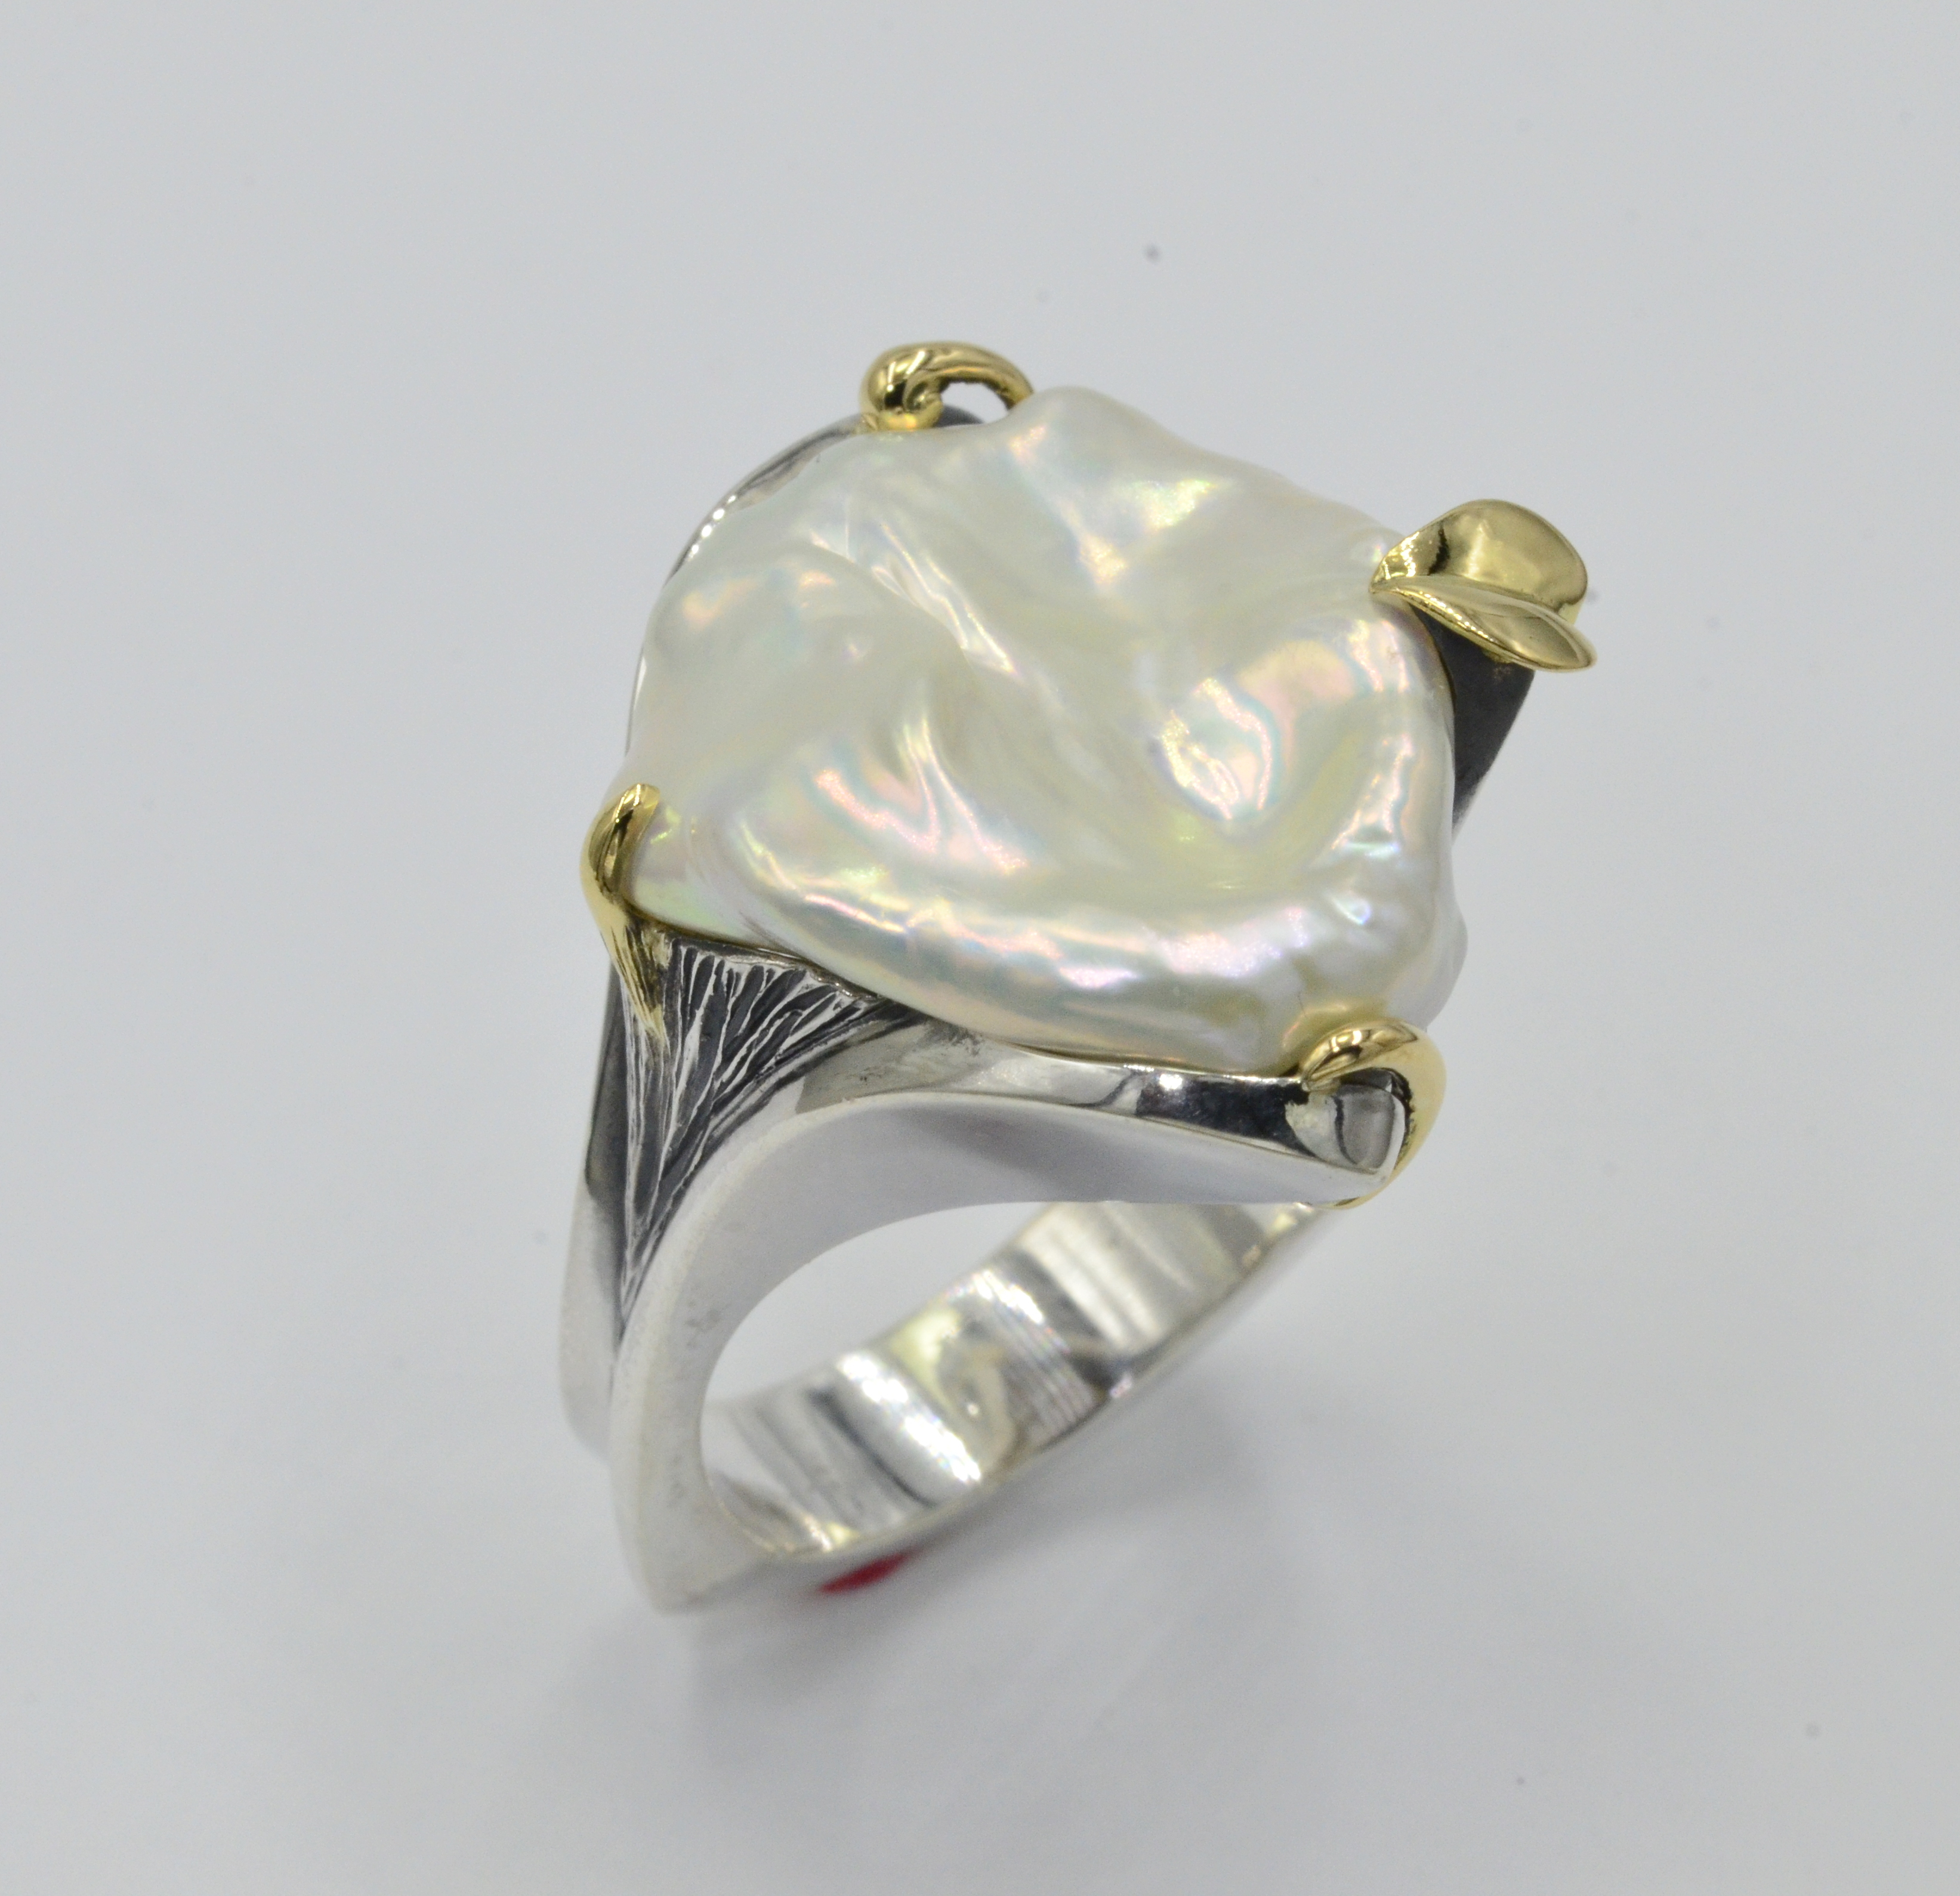 This ring presents itself as having a strong stance while being fluid and gentle. From the top view all you see is a beautiful White Freshwater Pearl held in place by gold leafs. The sides are graceful twist and turns. Classic Yanke Designs ! Pearl approximately 1" diameter.